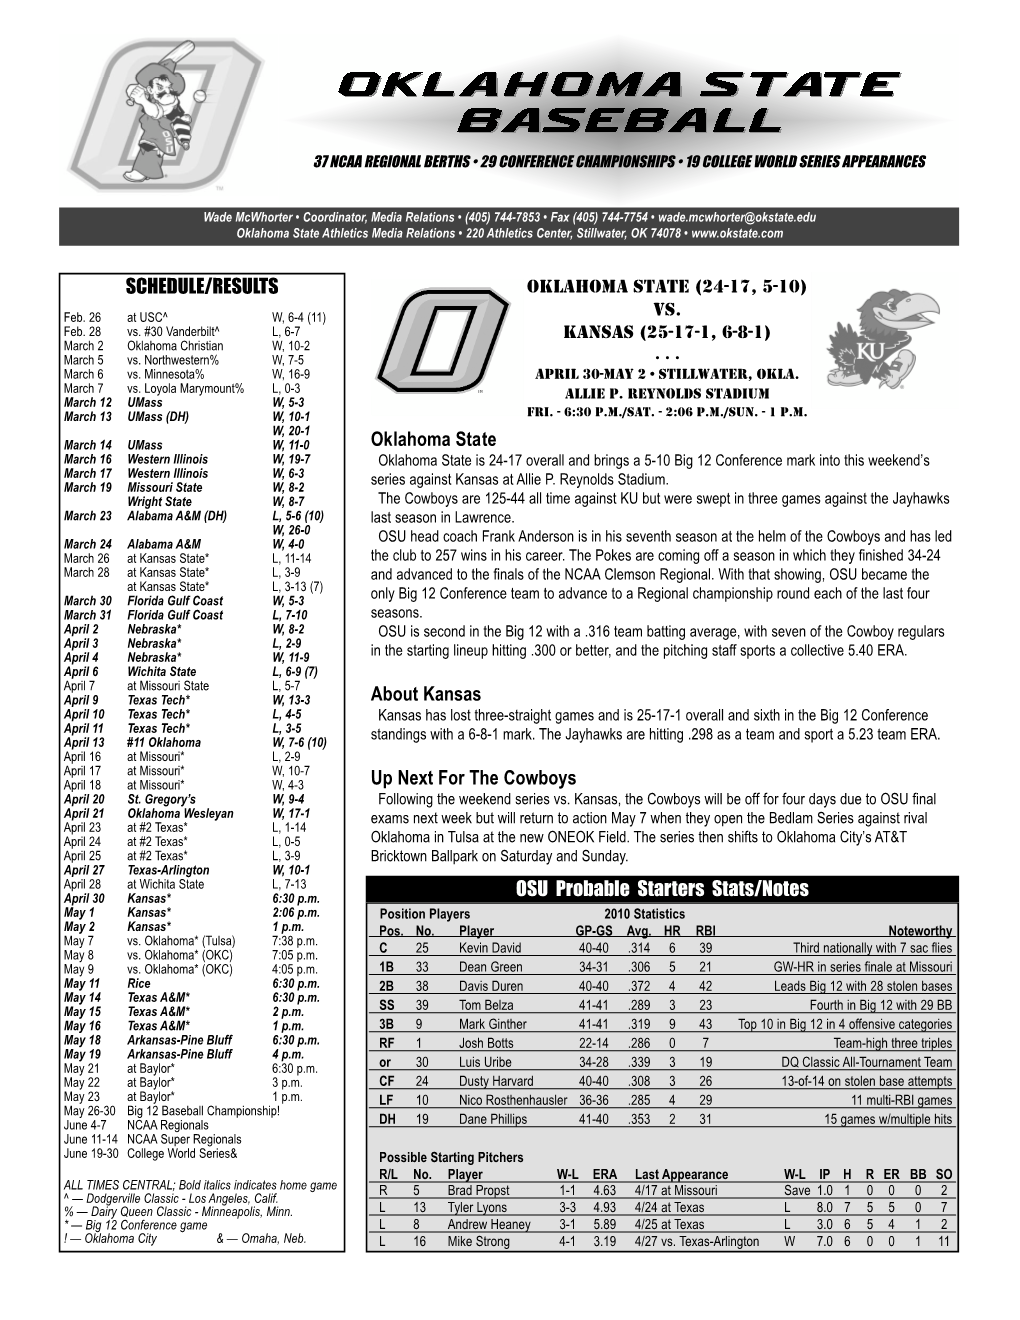 SCHEDULE/RESULTS OSU Probable Starters Stats/Notes Oklahoma